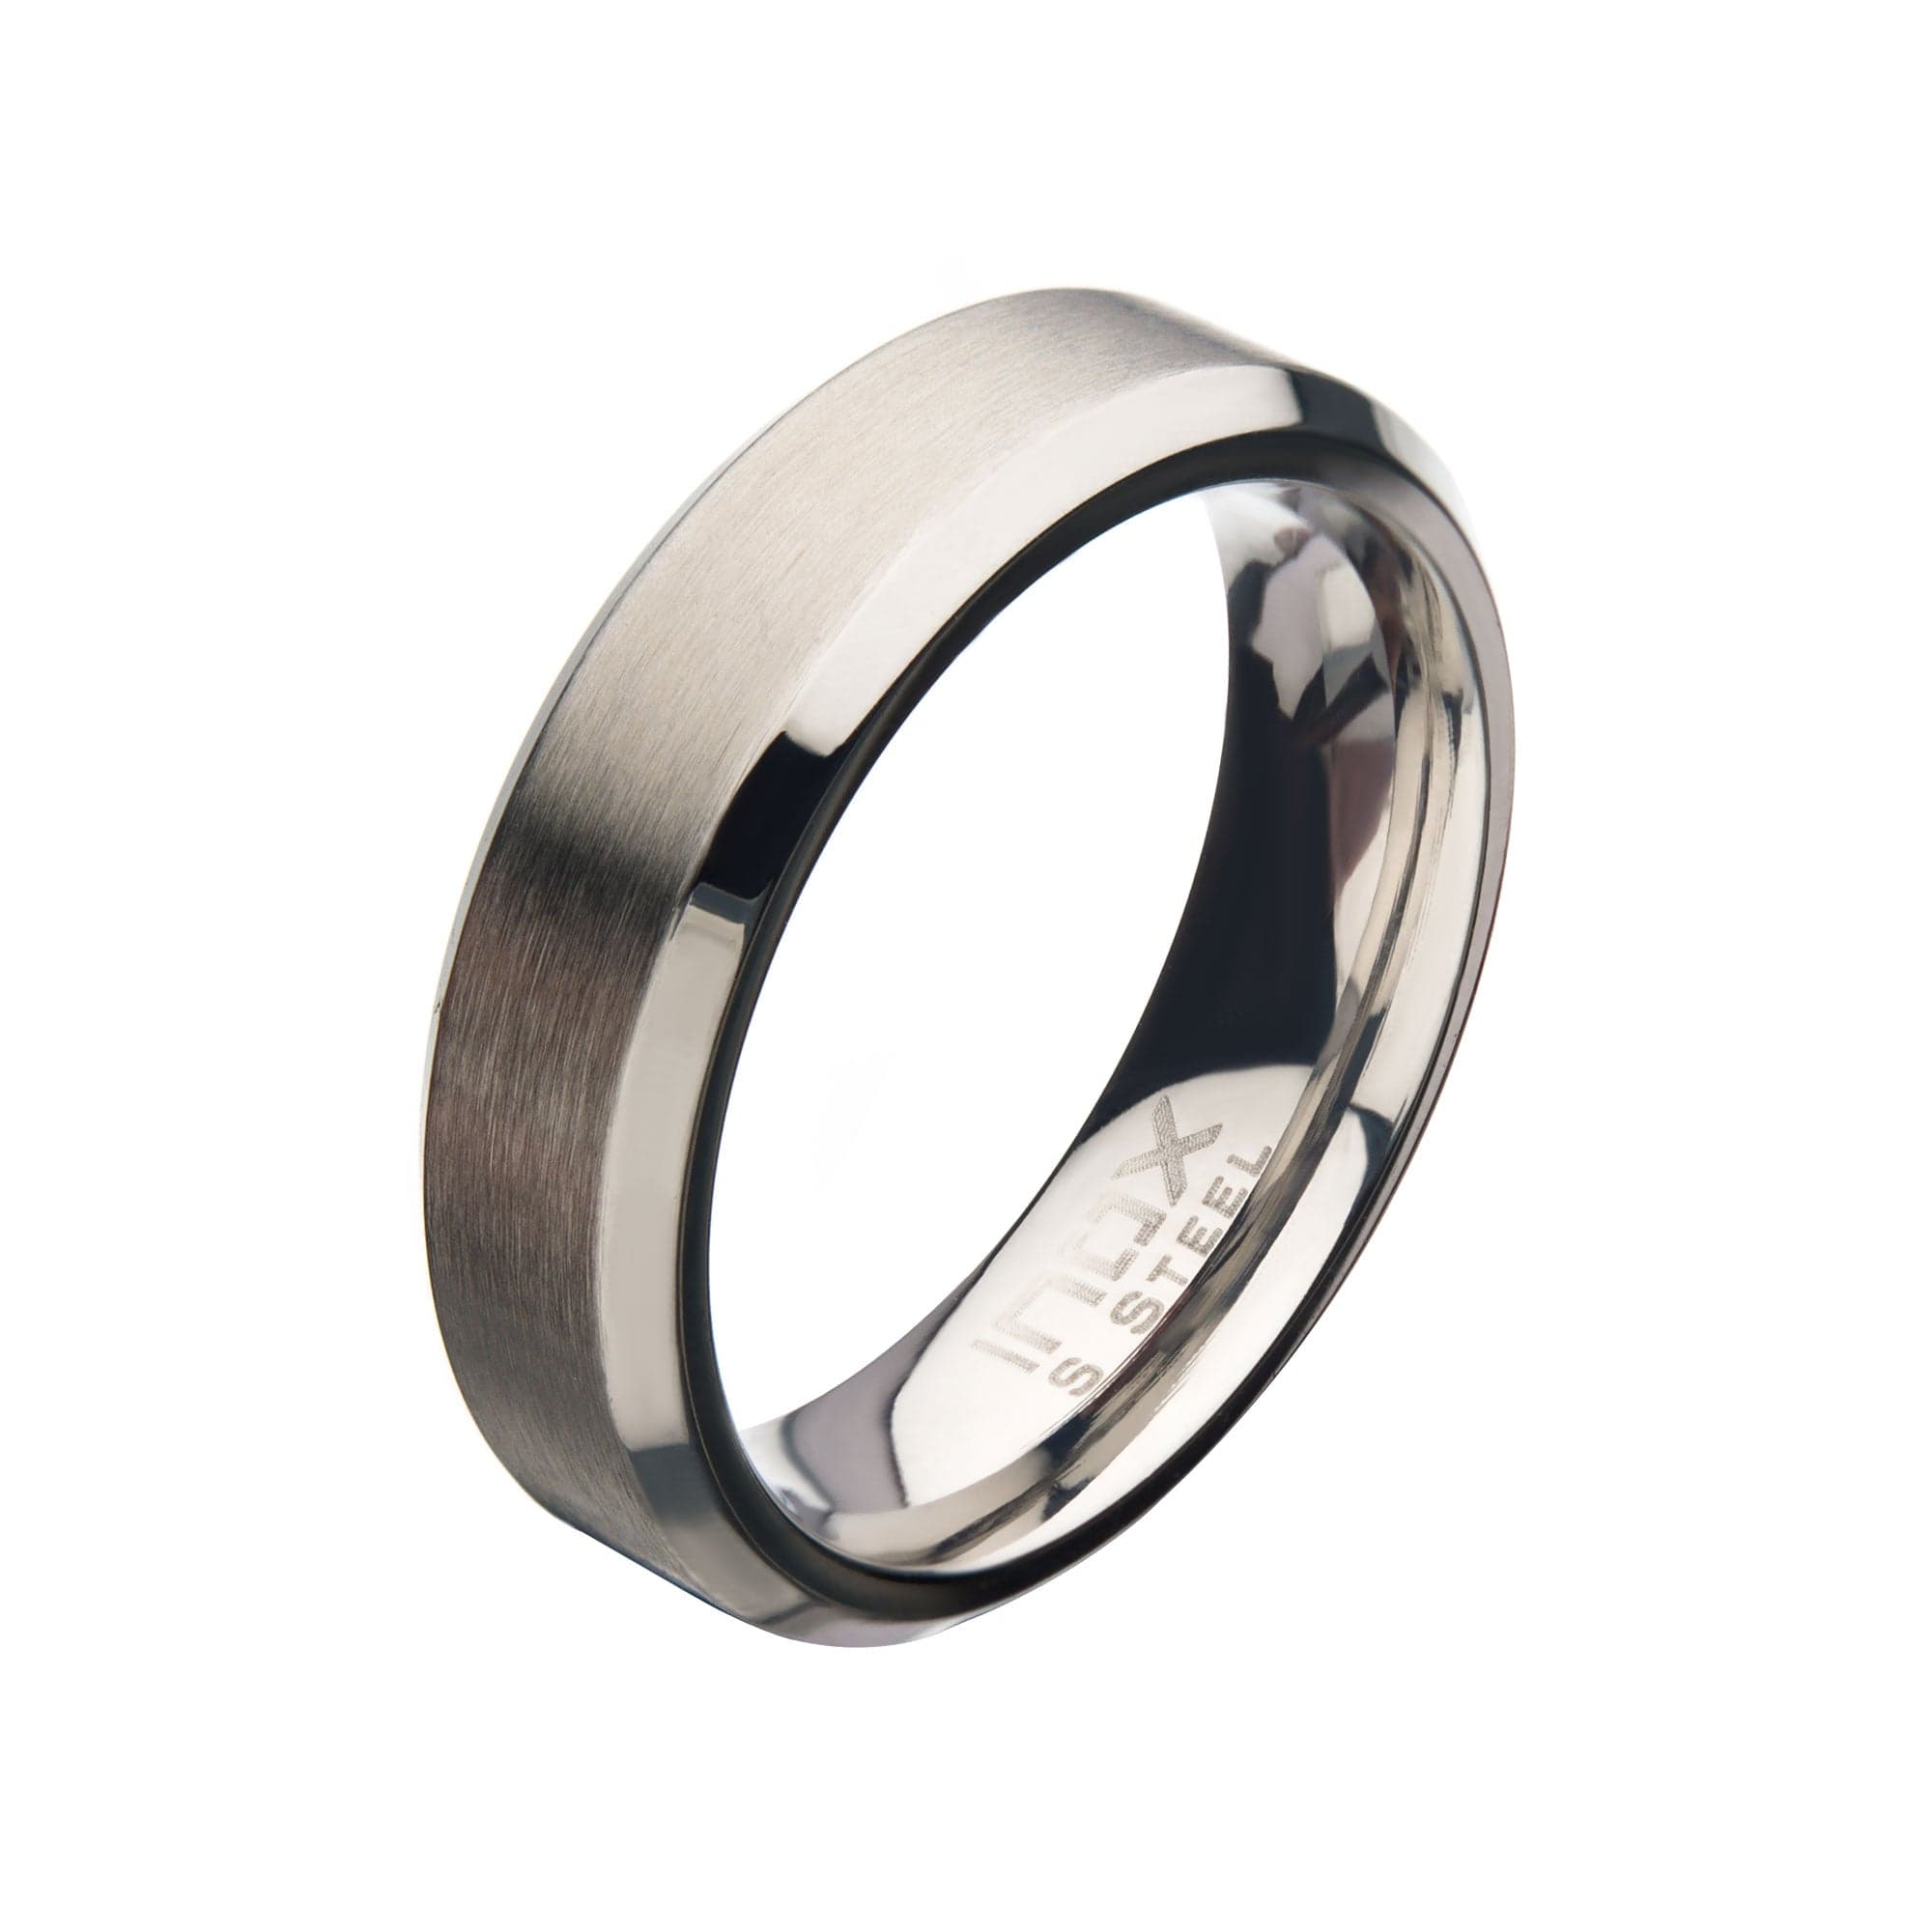 INOX JEWELRY Rings Silver Tone Stainless Steel 6mm Matte Finish Beveled Wedding Band Ring